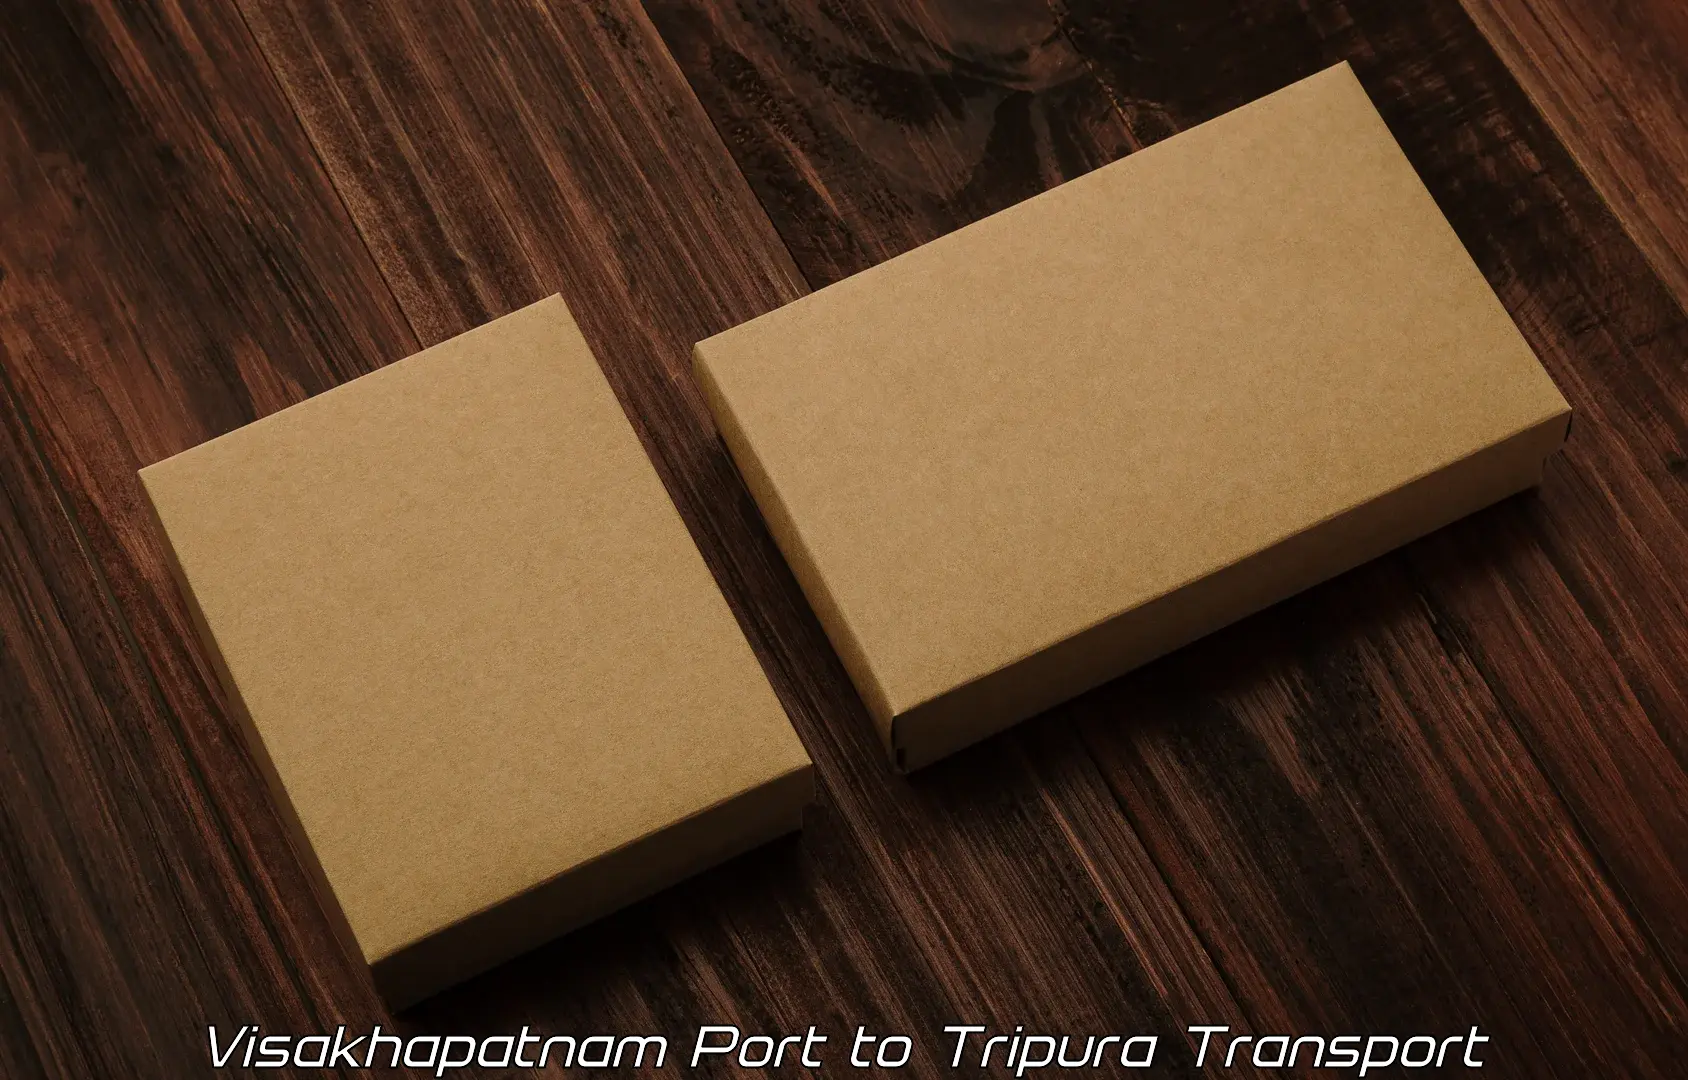 Package delivery services in Visakhapatnam Port to Santirbazar